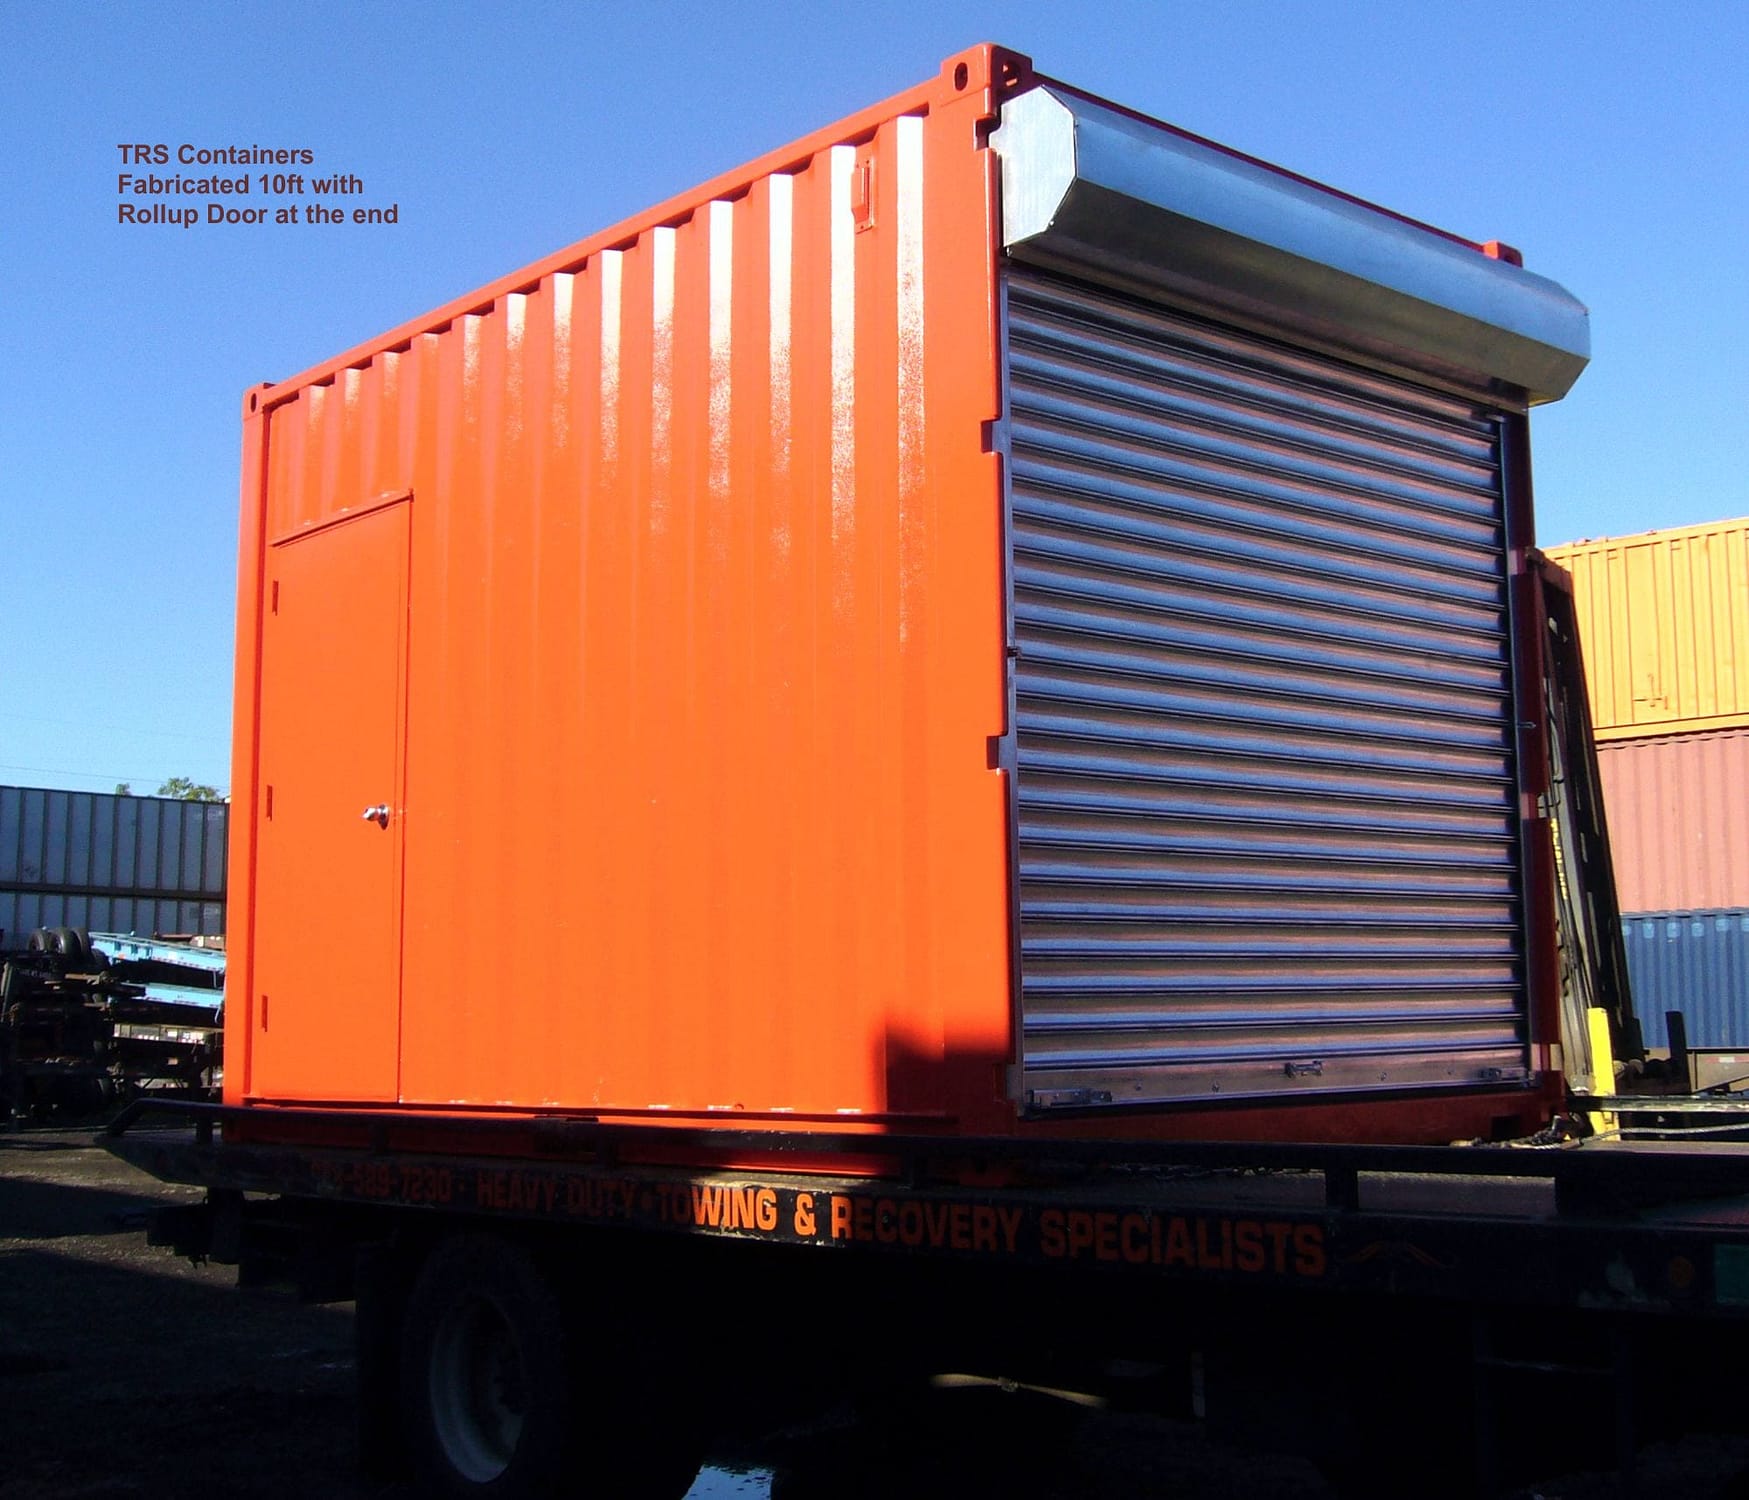 TRS Containers builds portable container workshops and welding stations